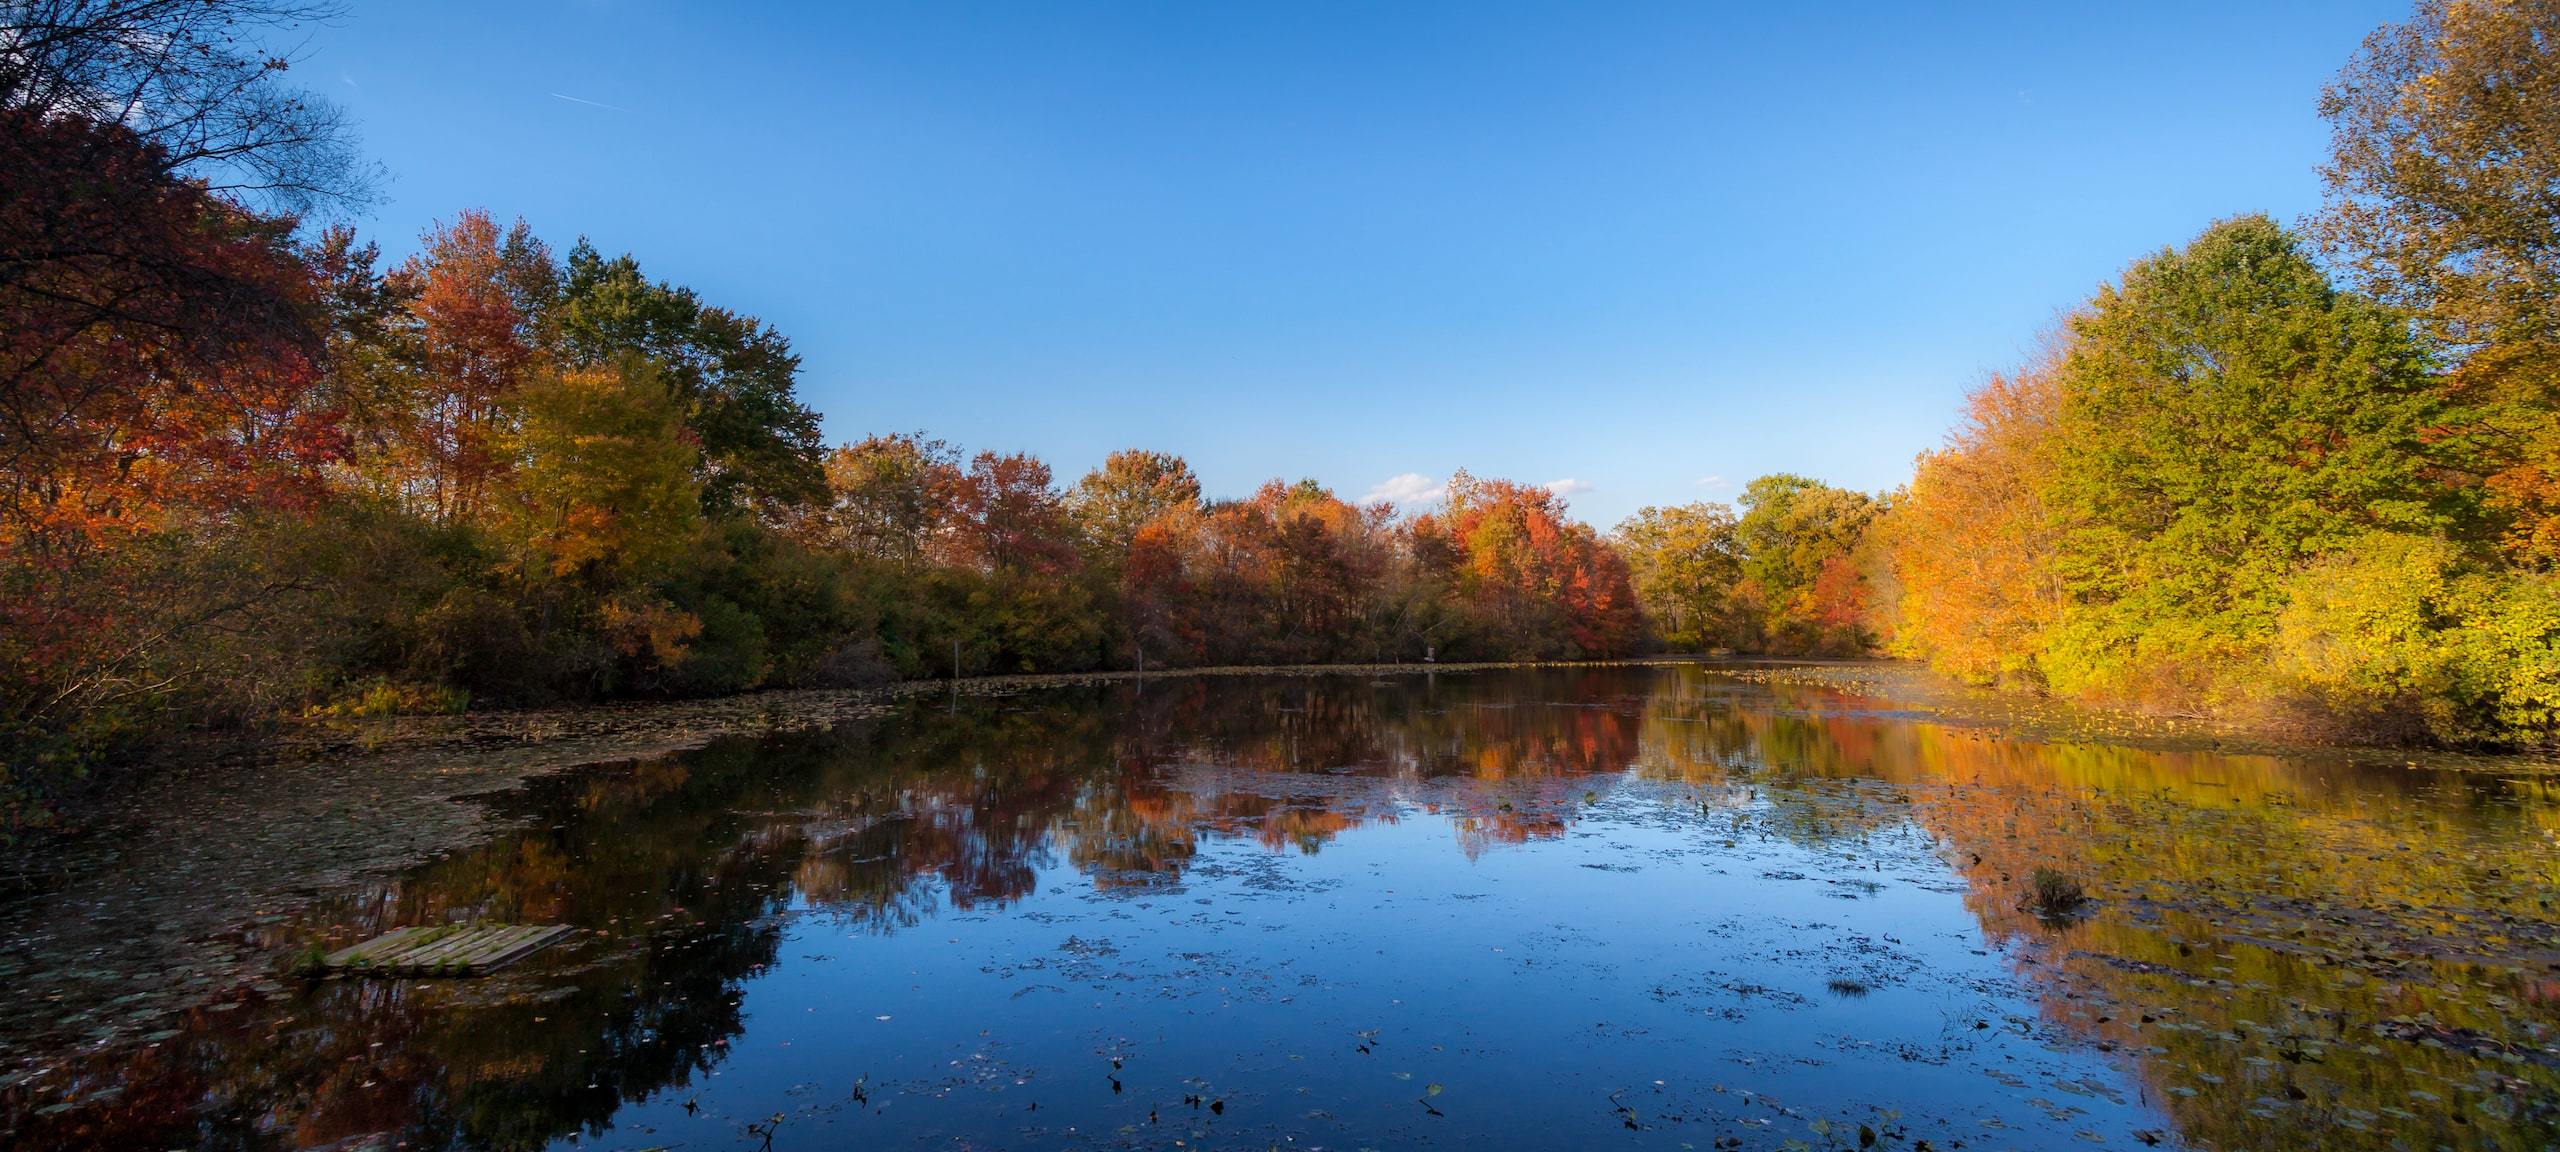 Fall foliage reflected in a pond inside Great Swamp National Wildlife Refuge in New Jersey.